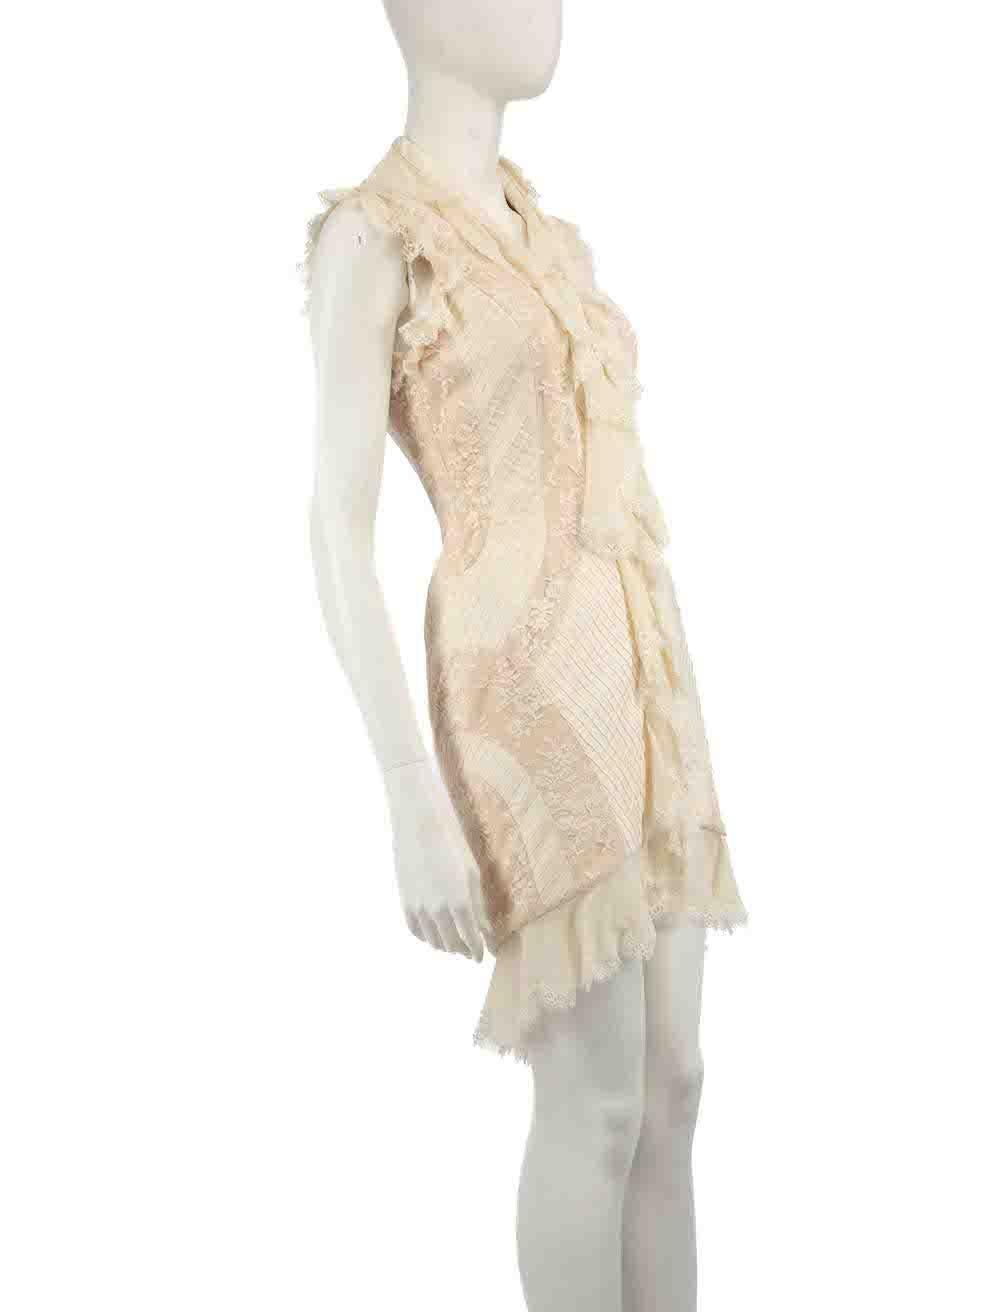 CONDITION is Very good. Hardly any visible wear to dress is evident on this used Temperley London designer resale item.
 
 
 
 Details
 
 
 Cream
 
 Silk
 
 Mini dress
 
 Lace ruffle trim detail
 
 V neckline
 
 Sleeveless
 
 Front button up